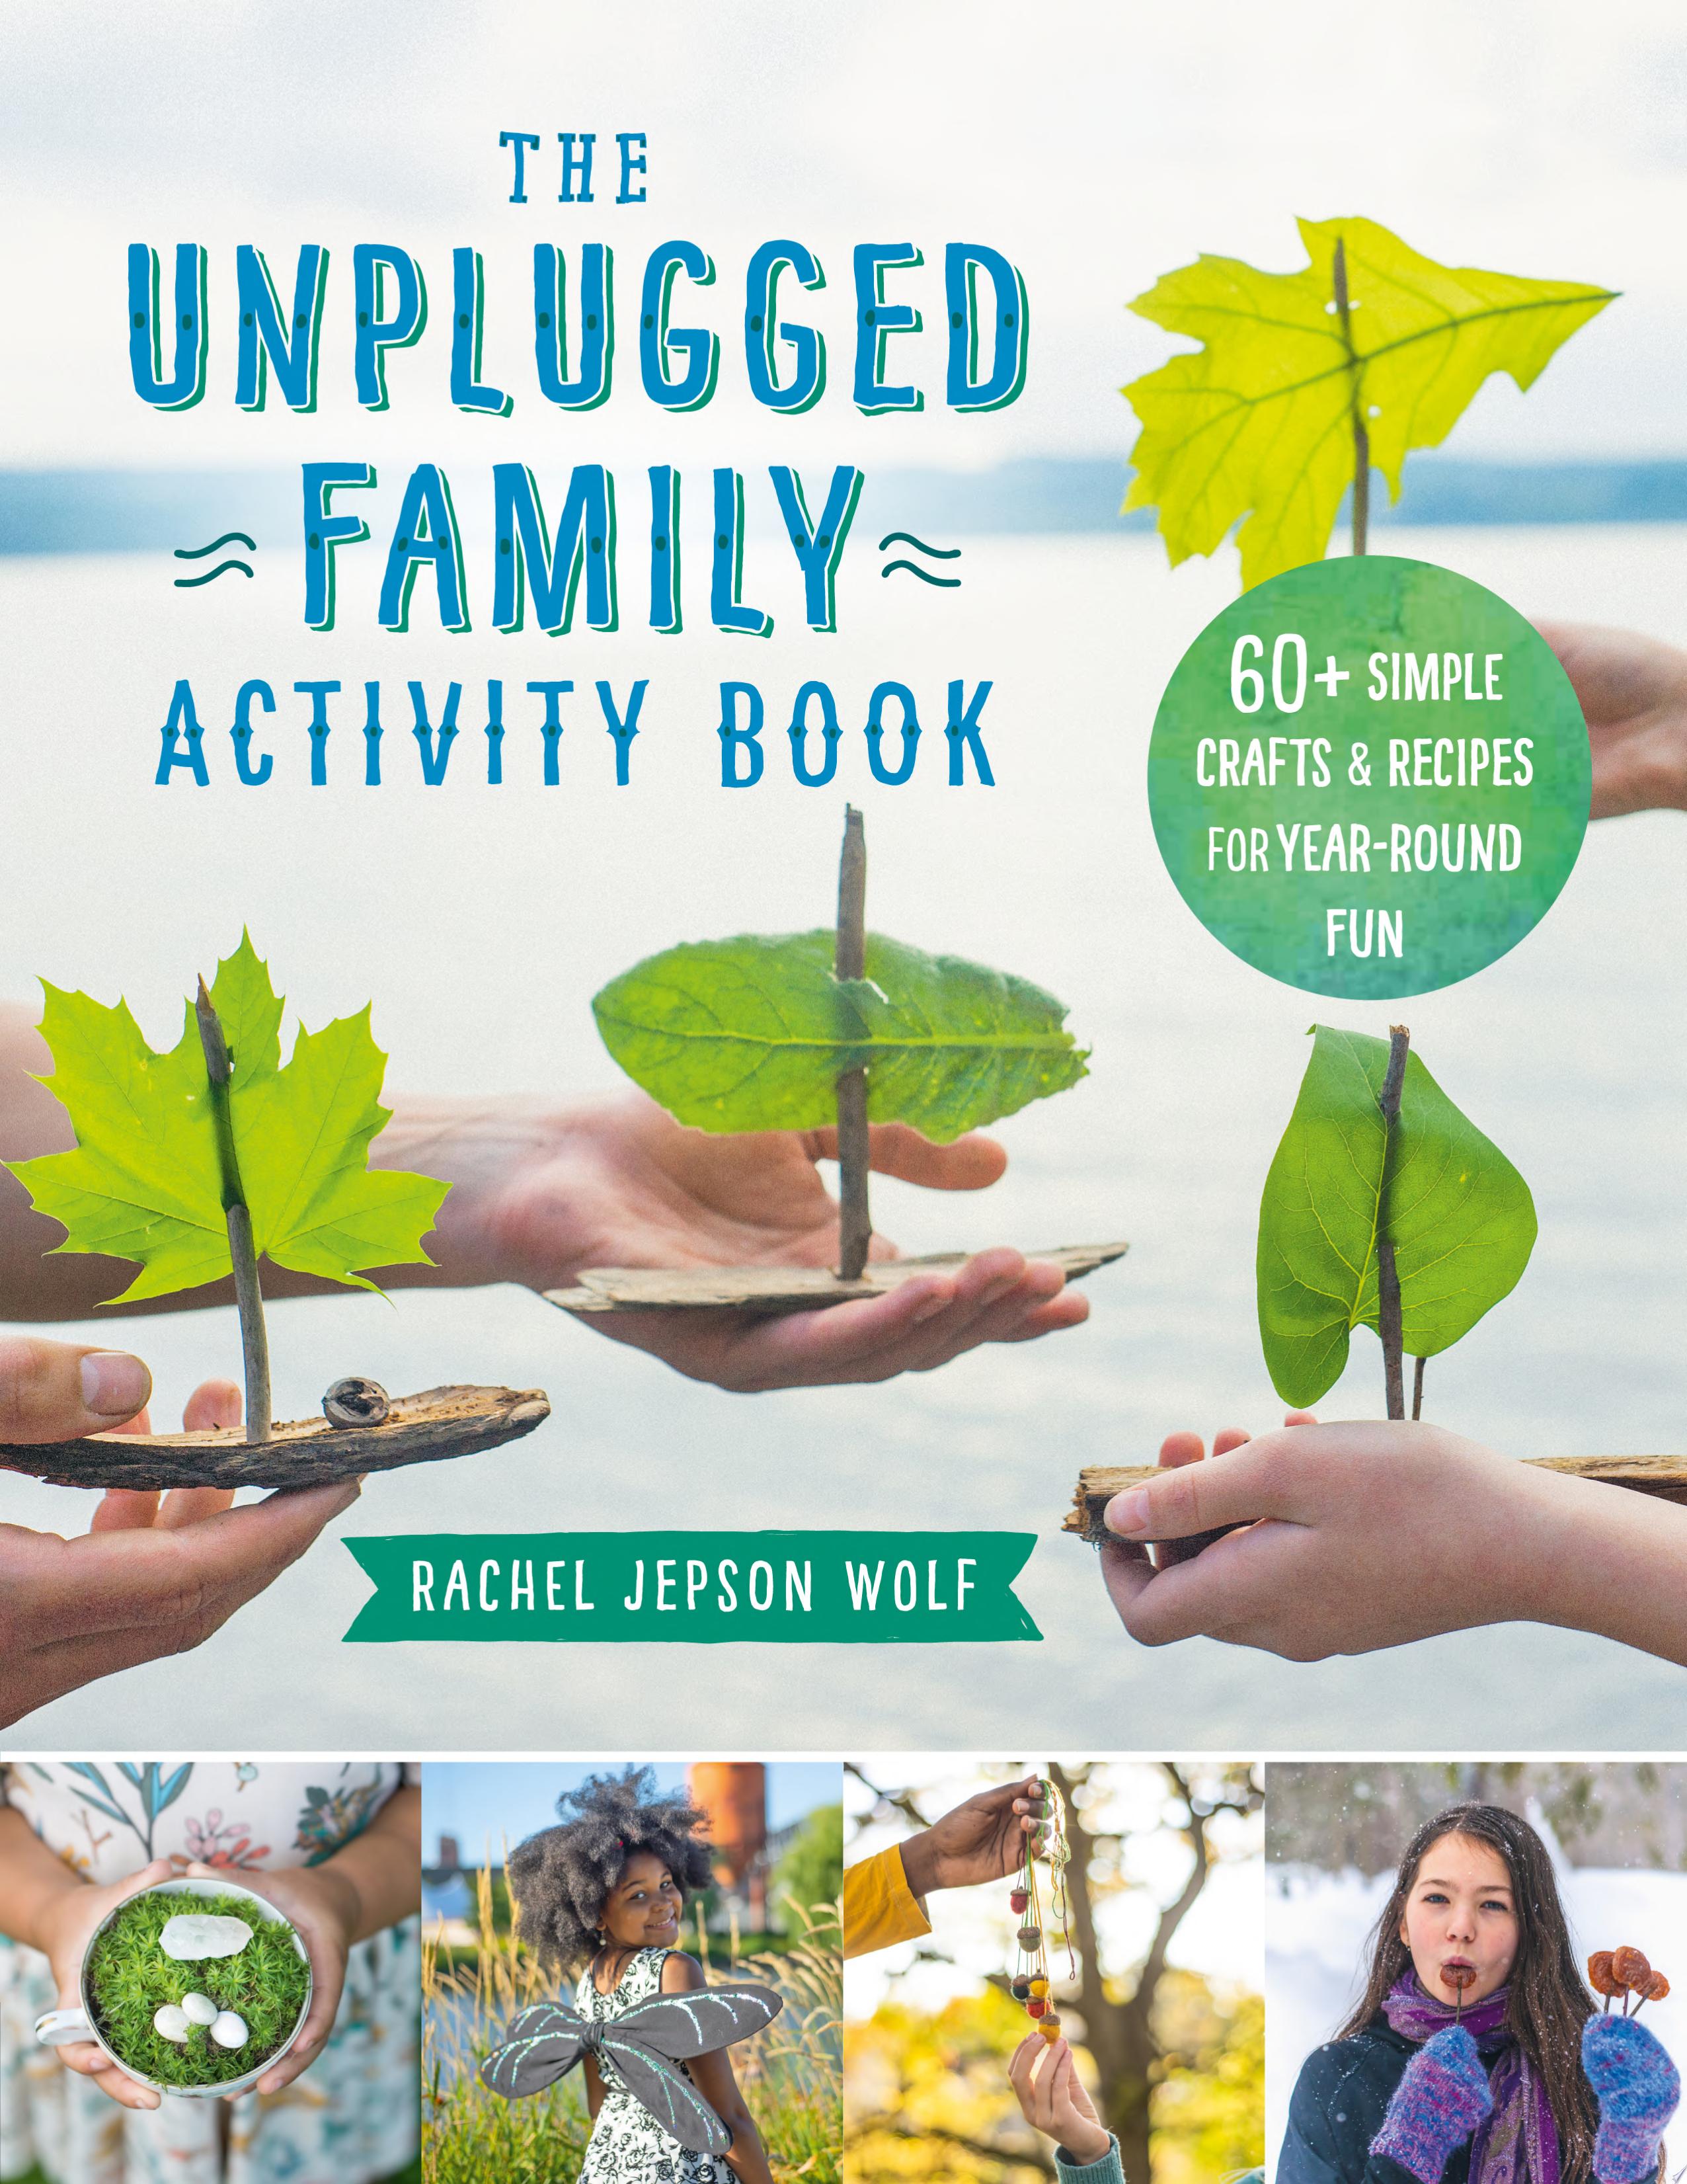 Image for "The Unplugged Family Activity Book"